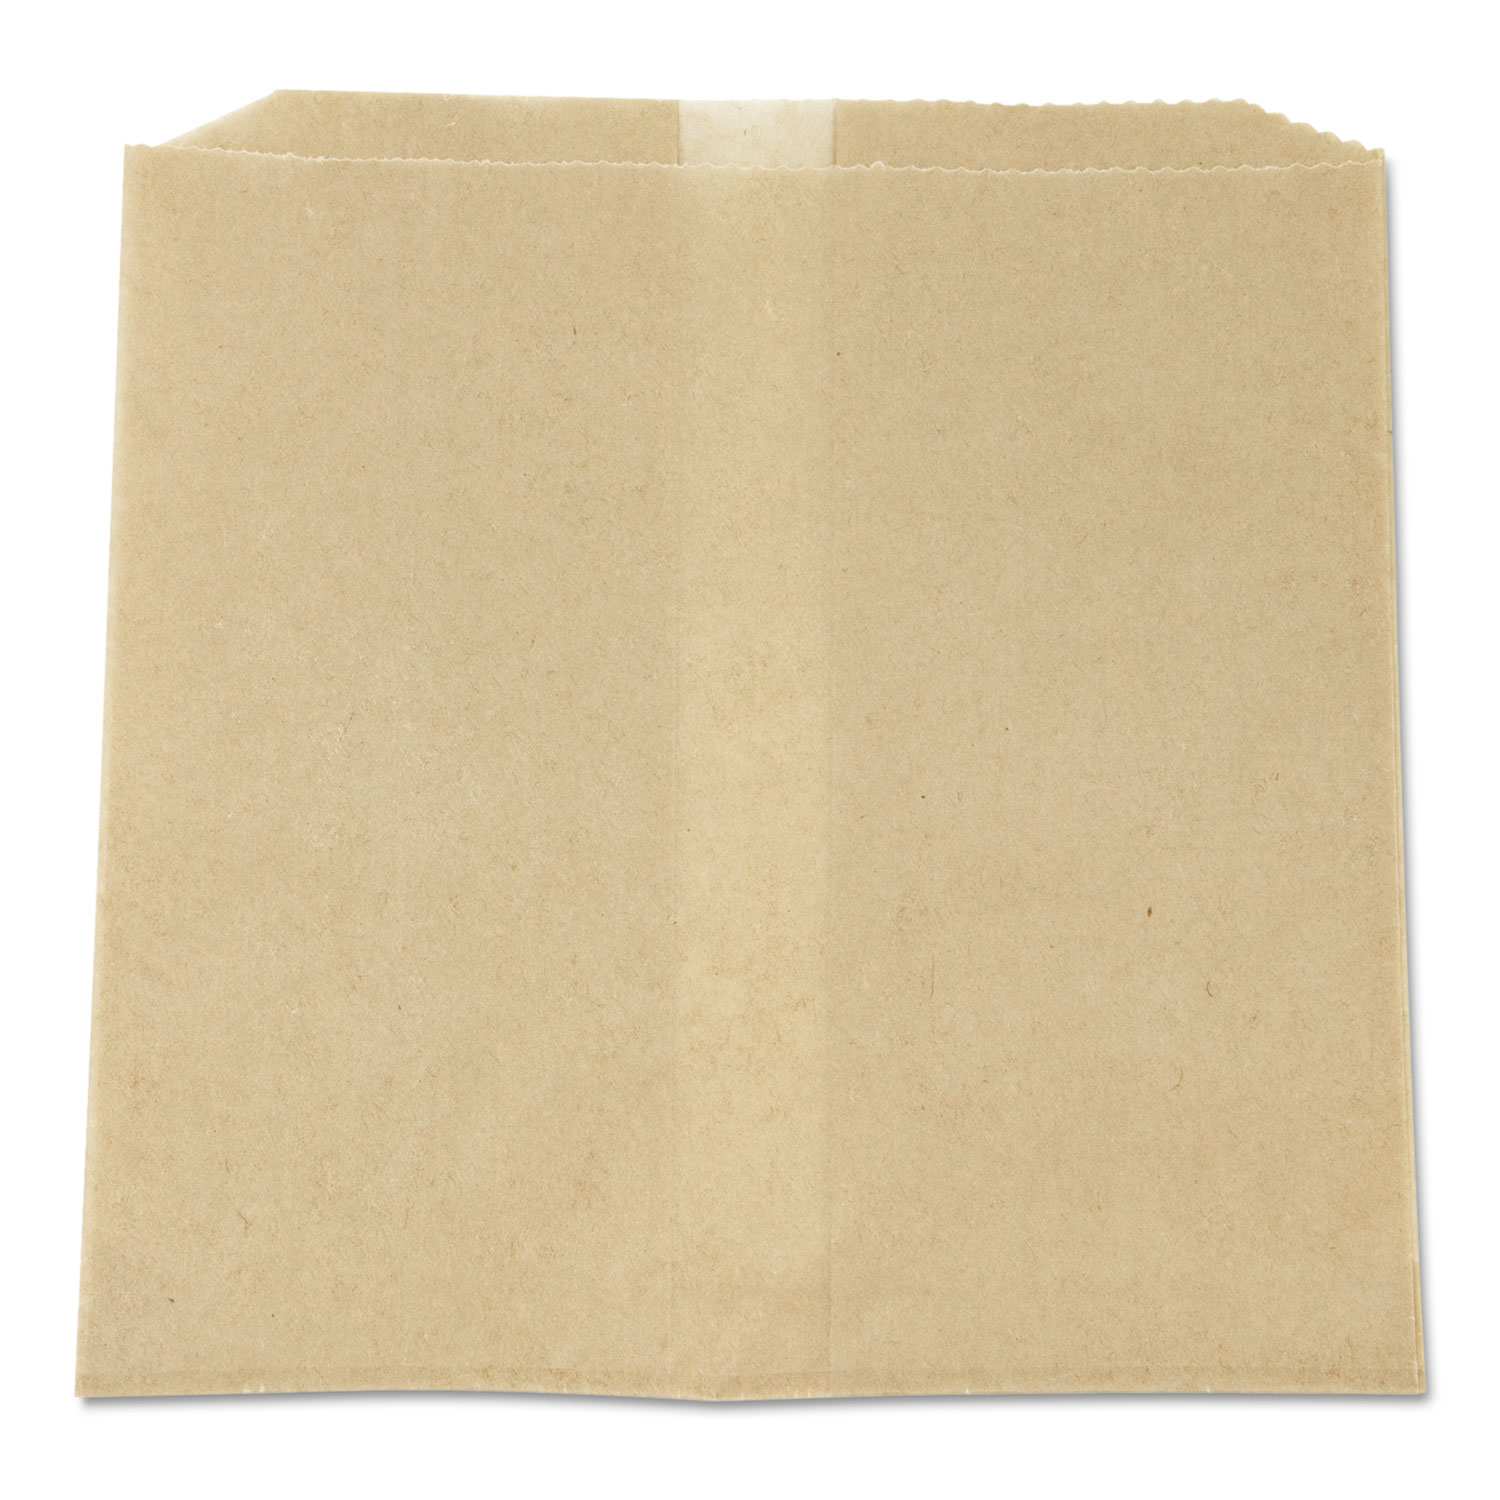 Waxed Napkin Receptacle Liners, 8 x 7 x 8, Brown, 500/Case